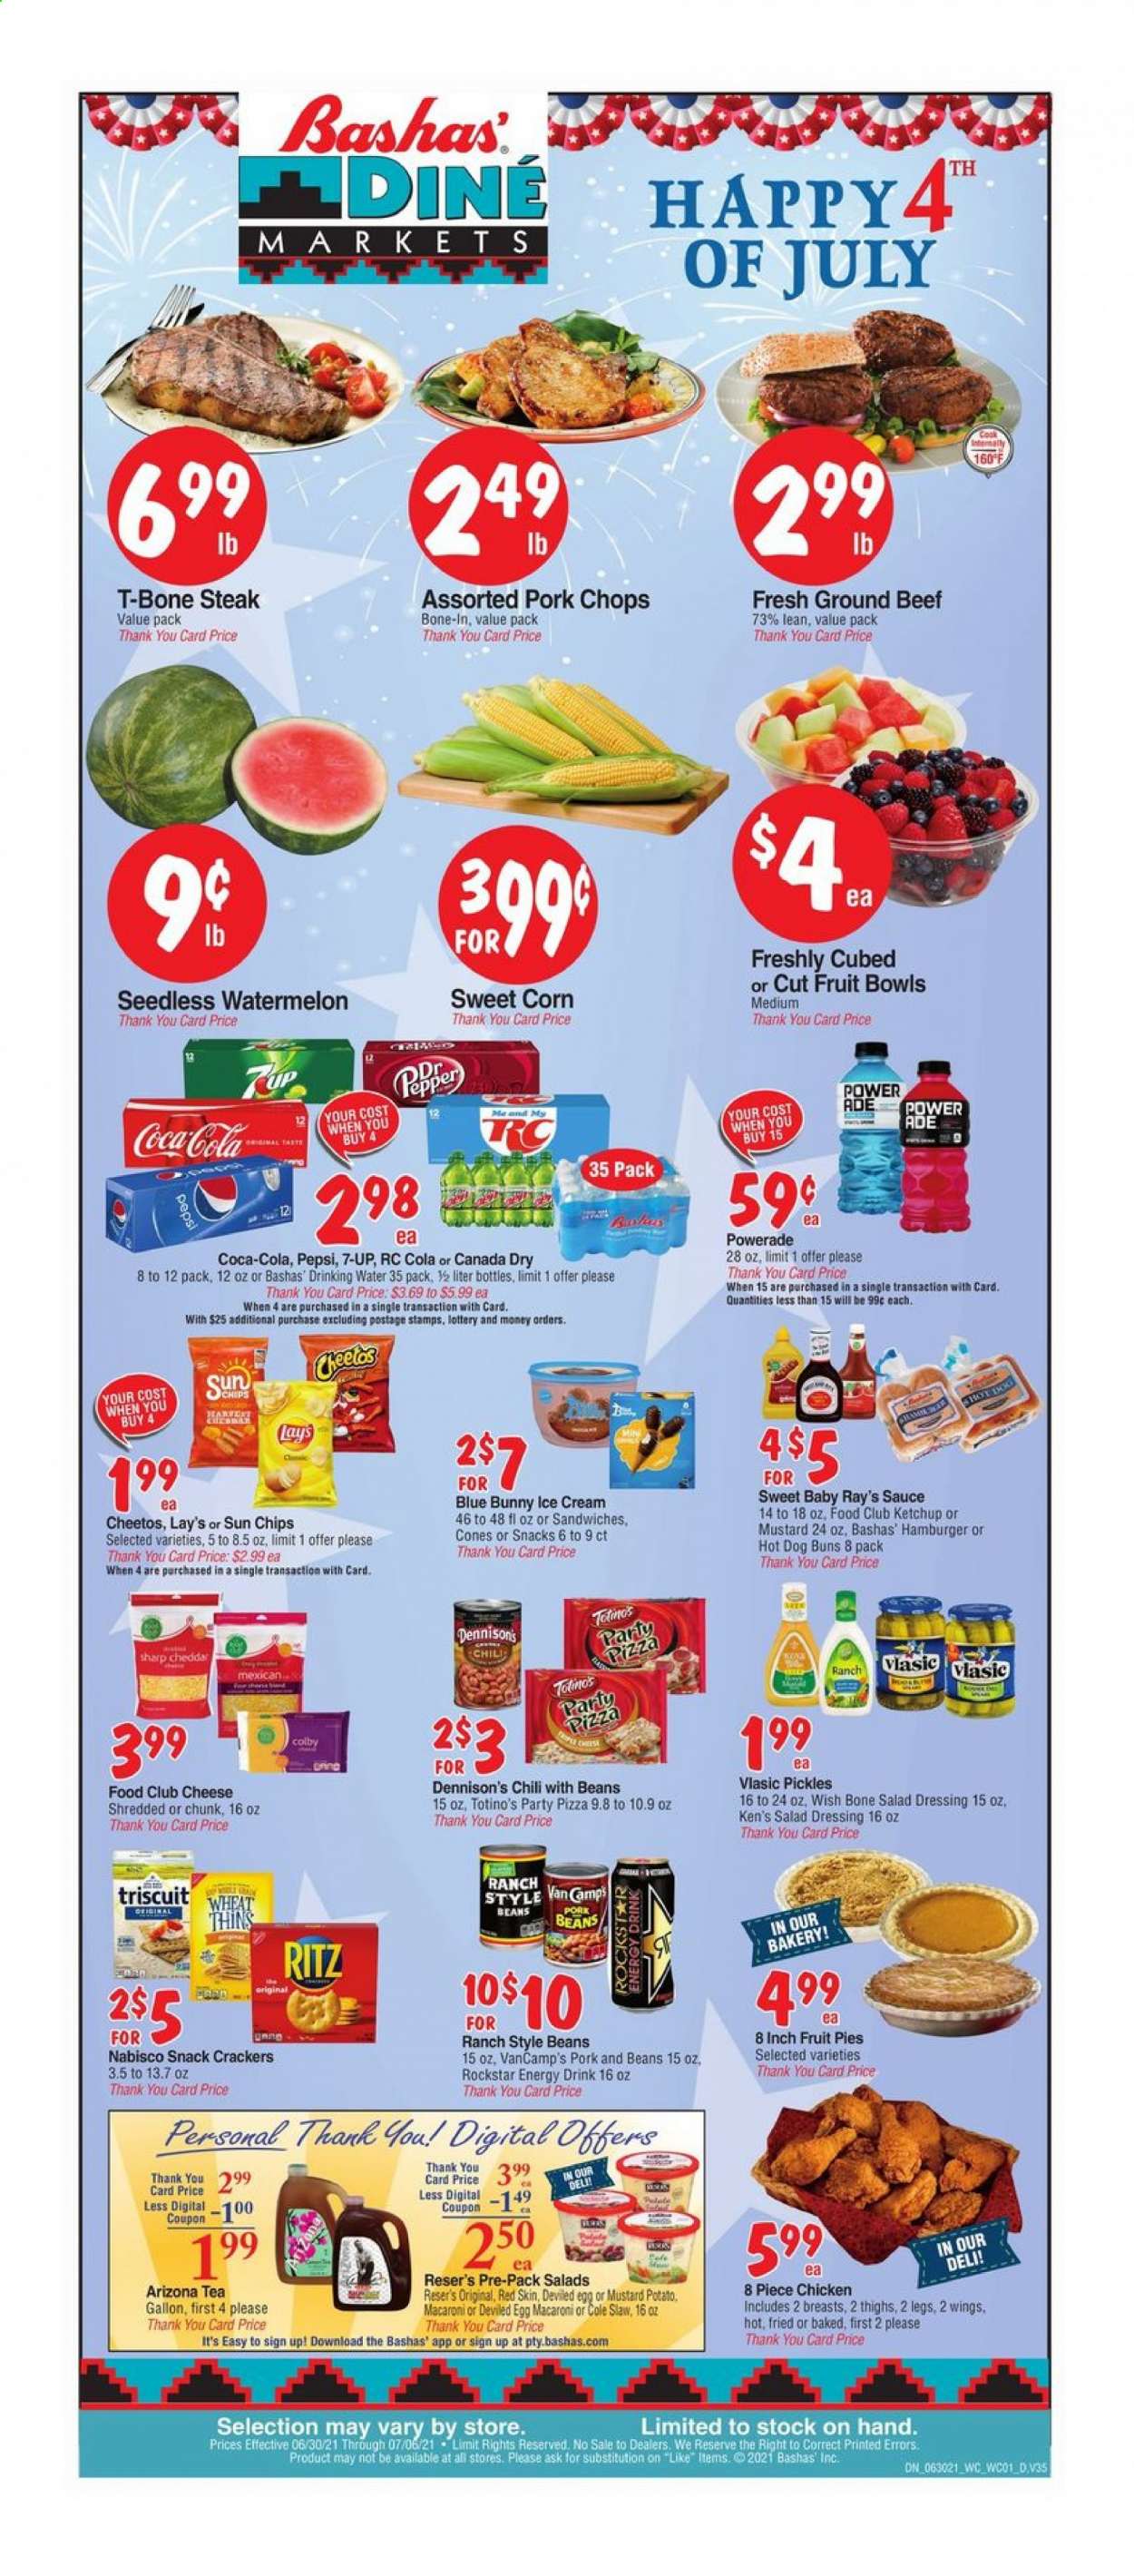 thumbnail - Bashas' Diné Markets Flyer - 06/30/2021 - 07/06/2021 - Sales products - buns, corn, sweet corn, watermelon, pizza, sandwich, macaroni, sauce, Colby cheese, eggs, ice cream, Blue Bunny, crackers, RITZ, Cheetos, chips, Lay’s, Thins, pickles, mustard, salad dressing, ketchup, dressing, Canada Dry, Coca-Cola, Powerade, Pepsi, energy drink, 7UP, AriZona, Rockstar, tea, beef meat, ground beef, t-bone steak, steak, pork chops, pork meat. Page 1.